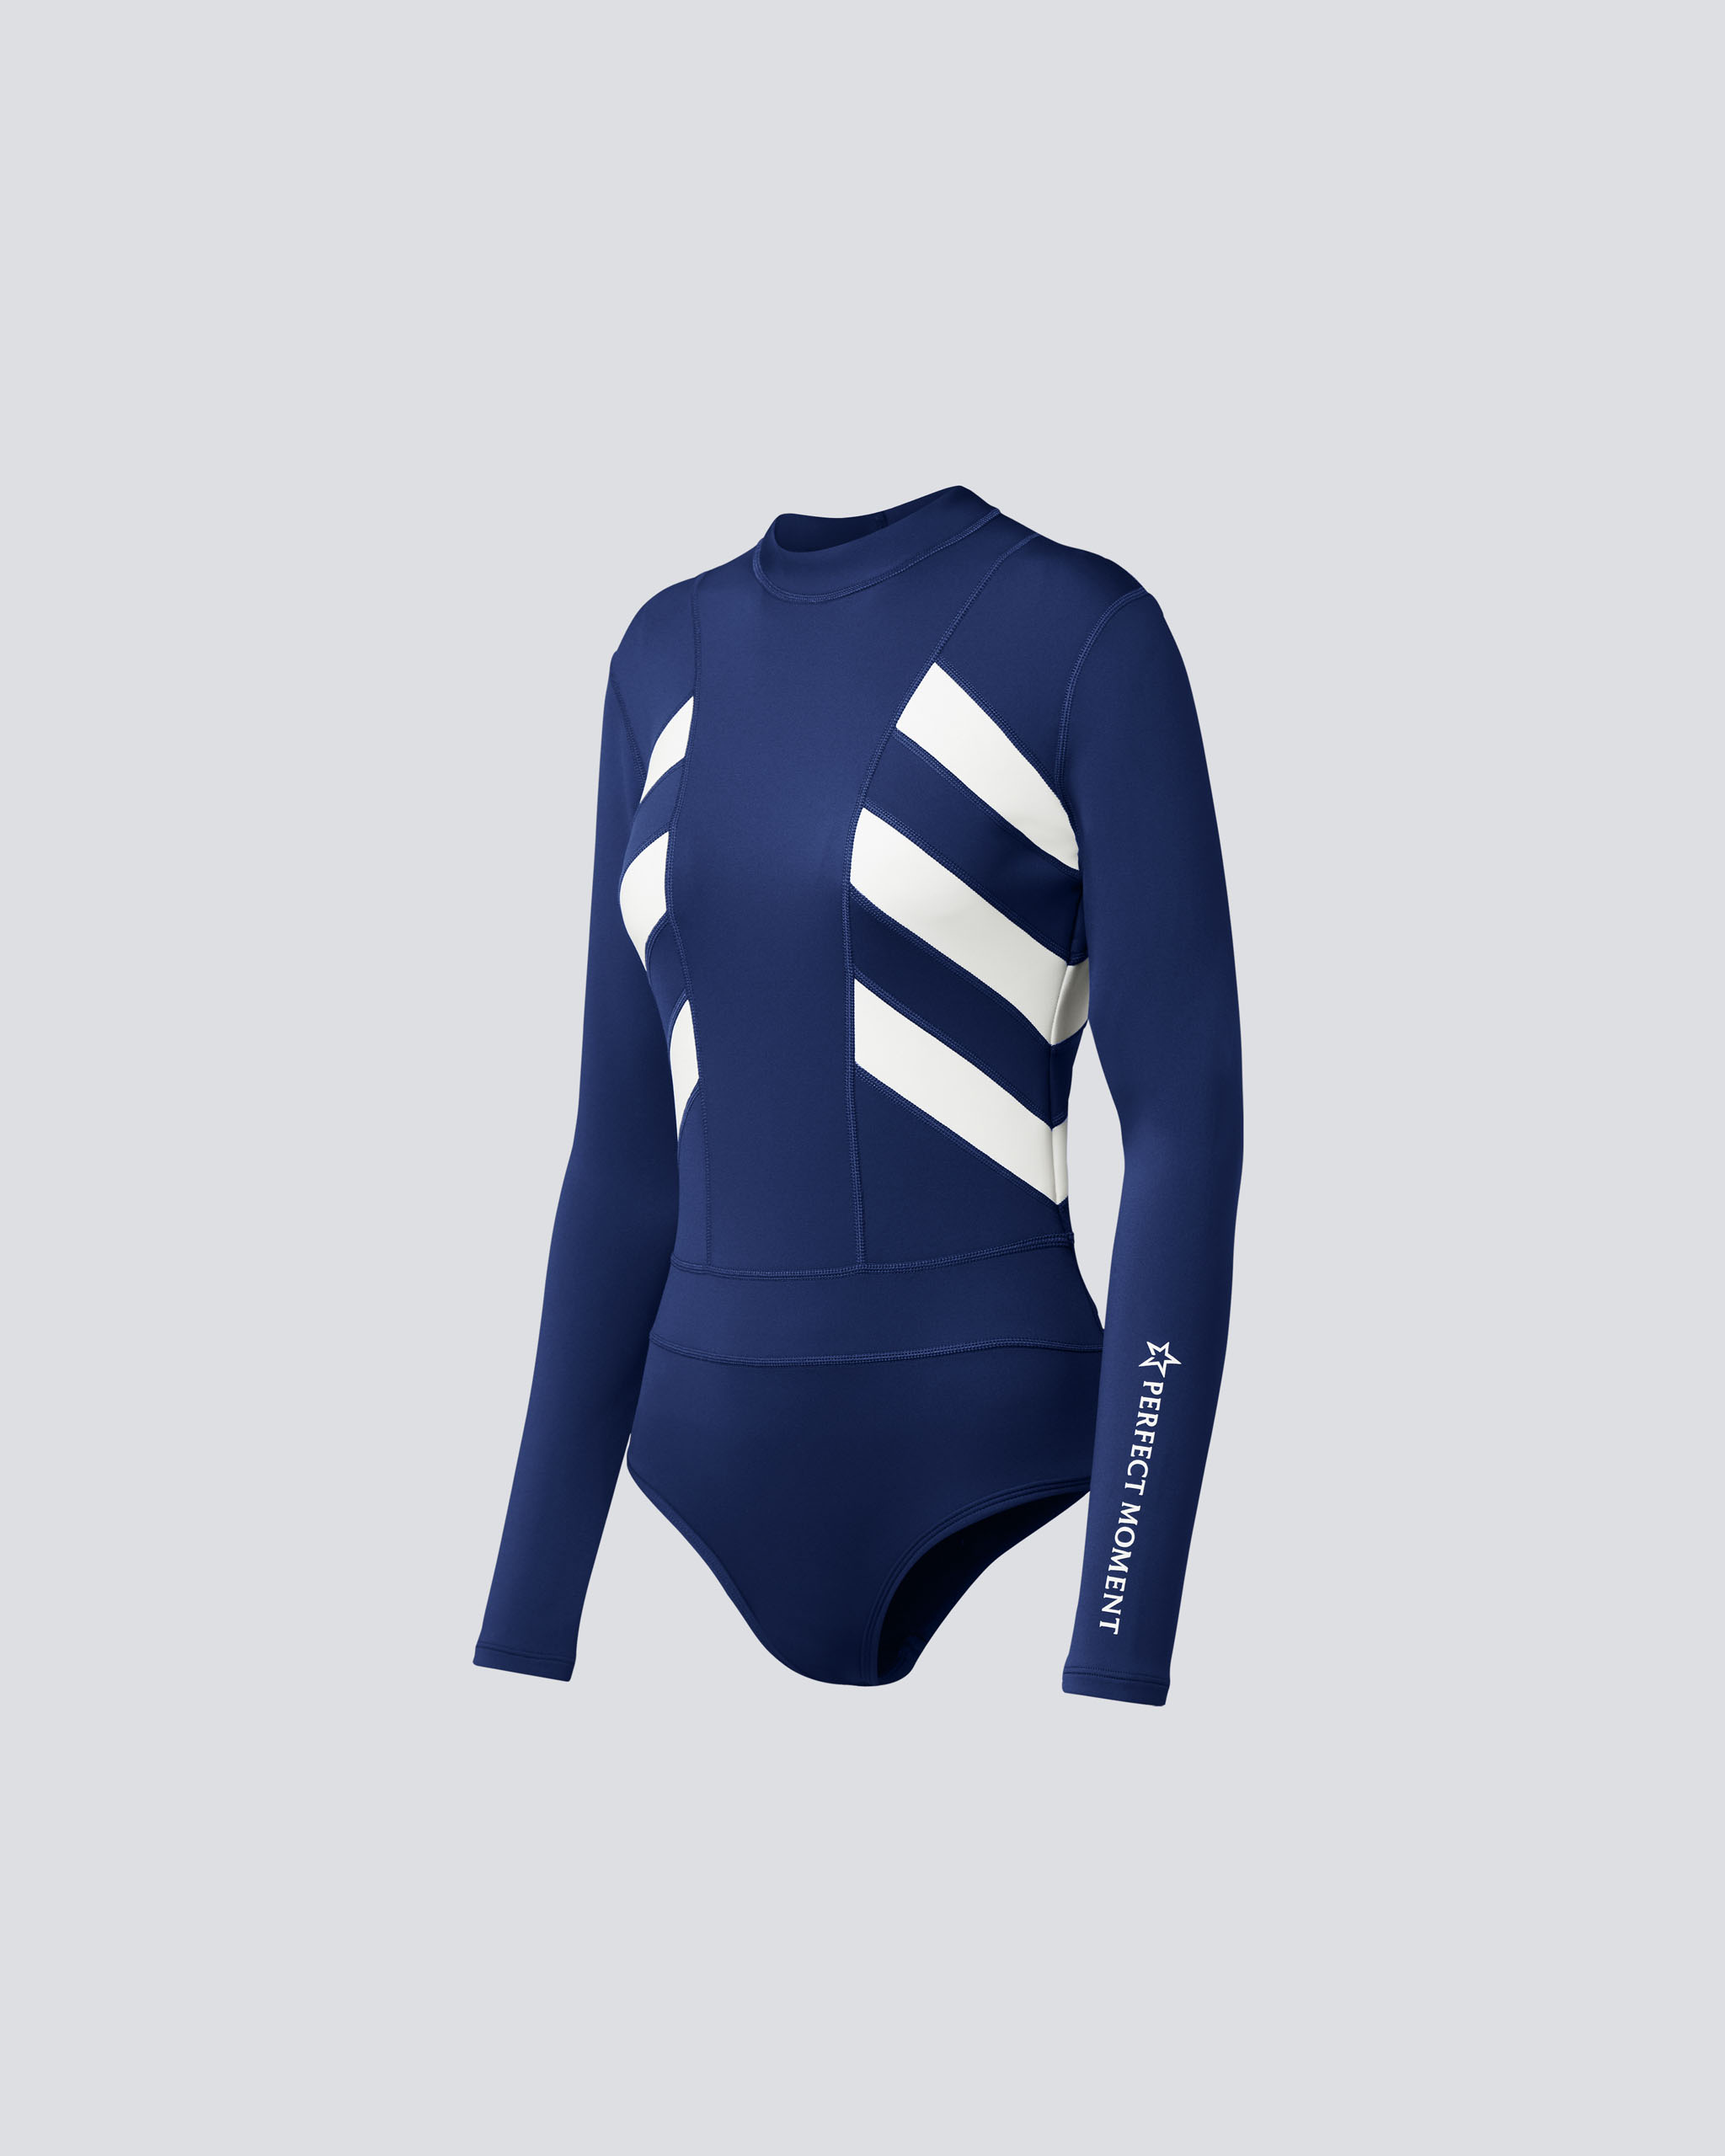 Perfect Moment Imok Neo Wetsuit In Navy